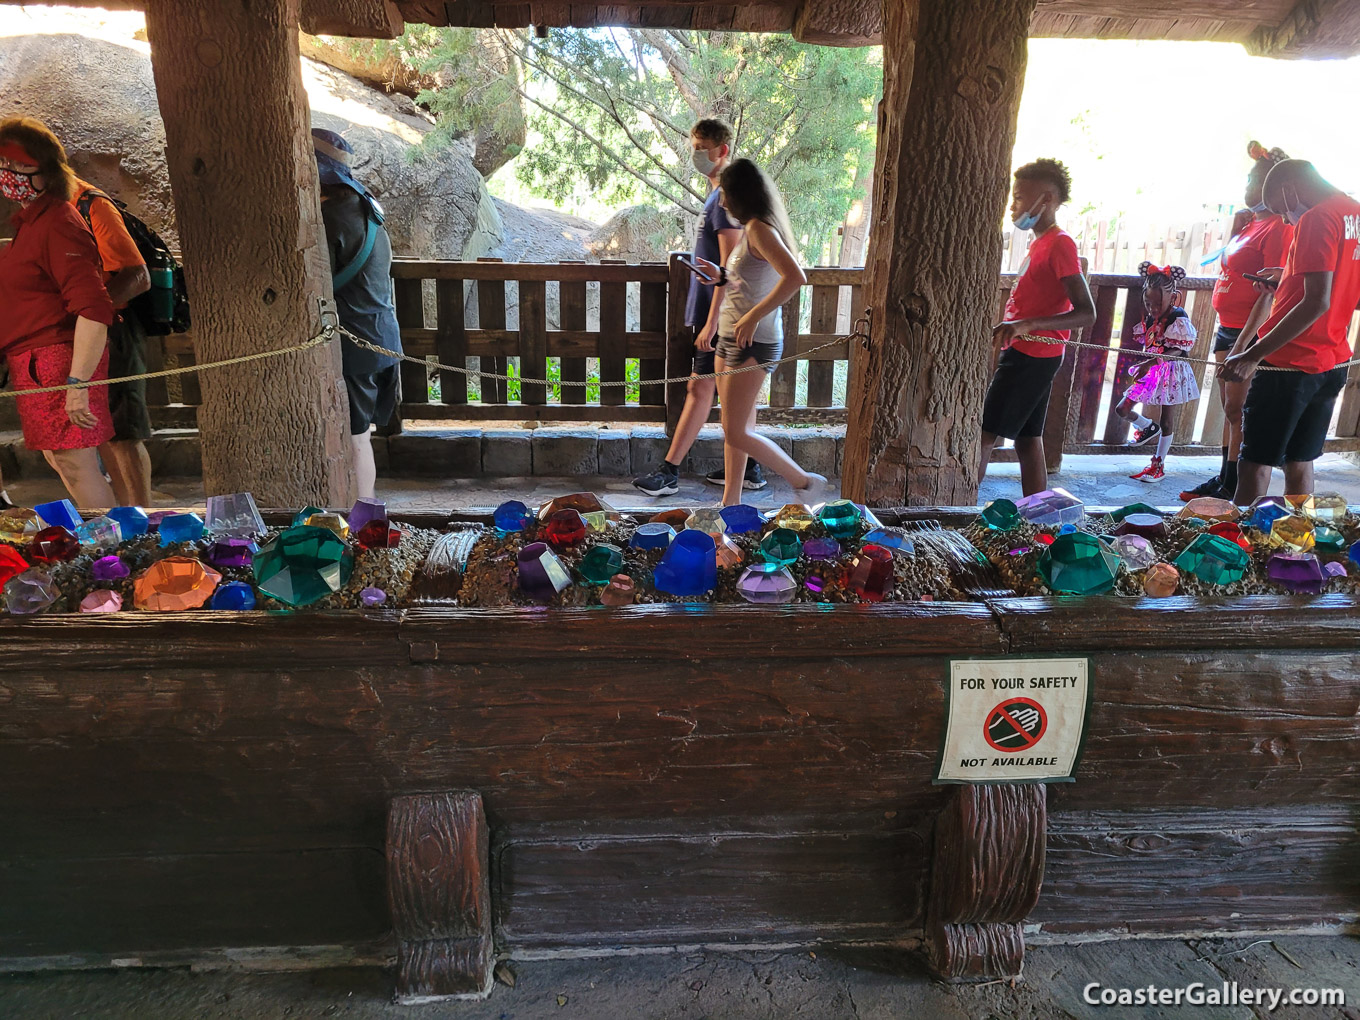 Interactive Disney games in the waiting queue of the Seven Dwarfs Mine Train